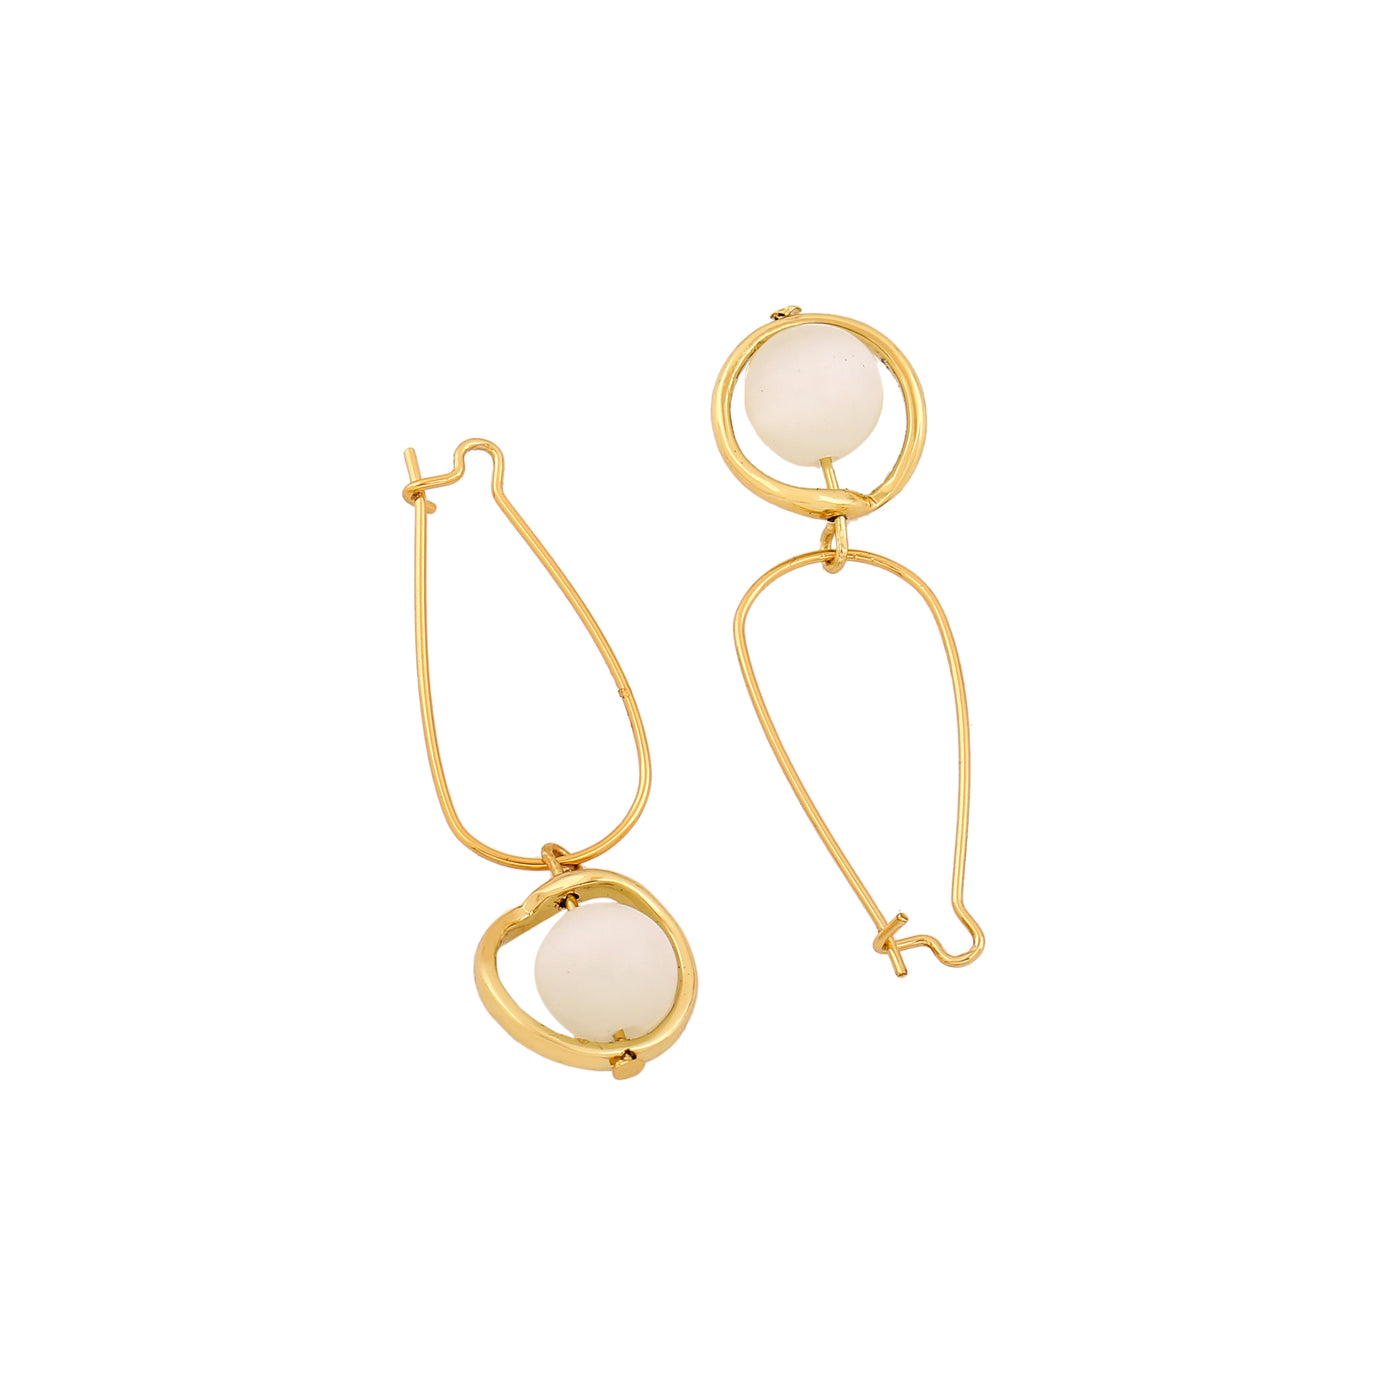 Estele Gold Plated Glamorous Drop Earrings with White Pearls for Women